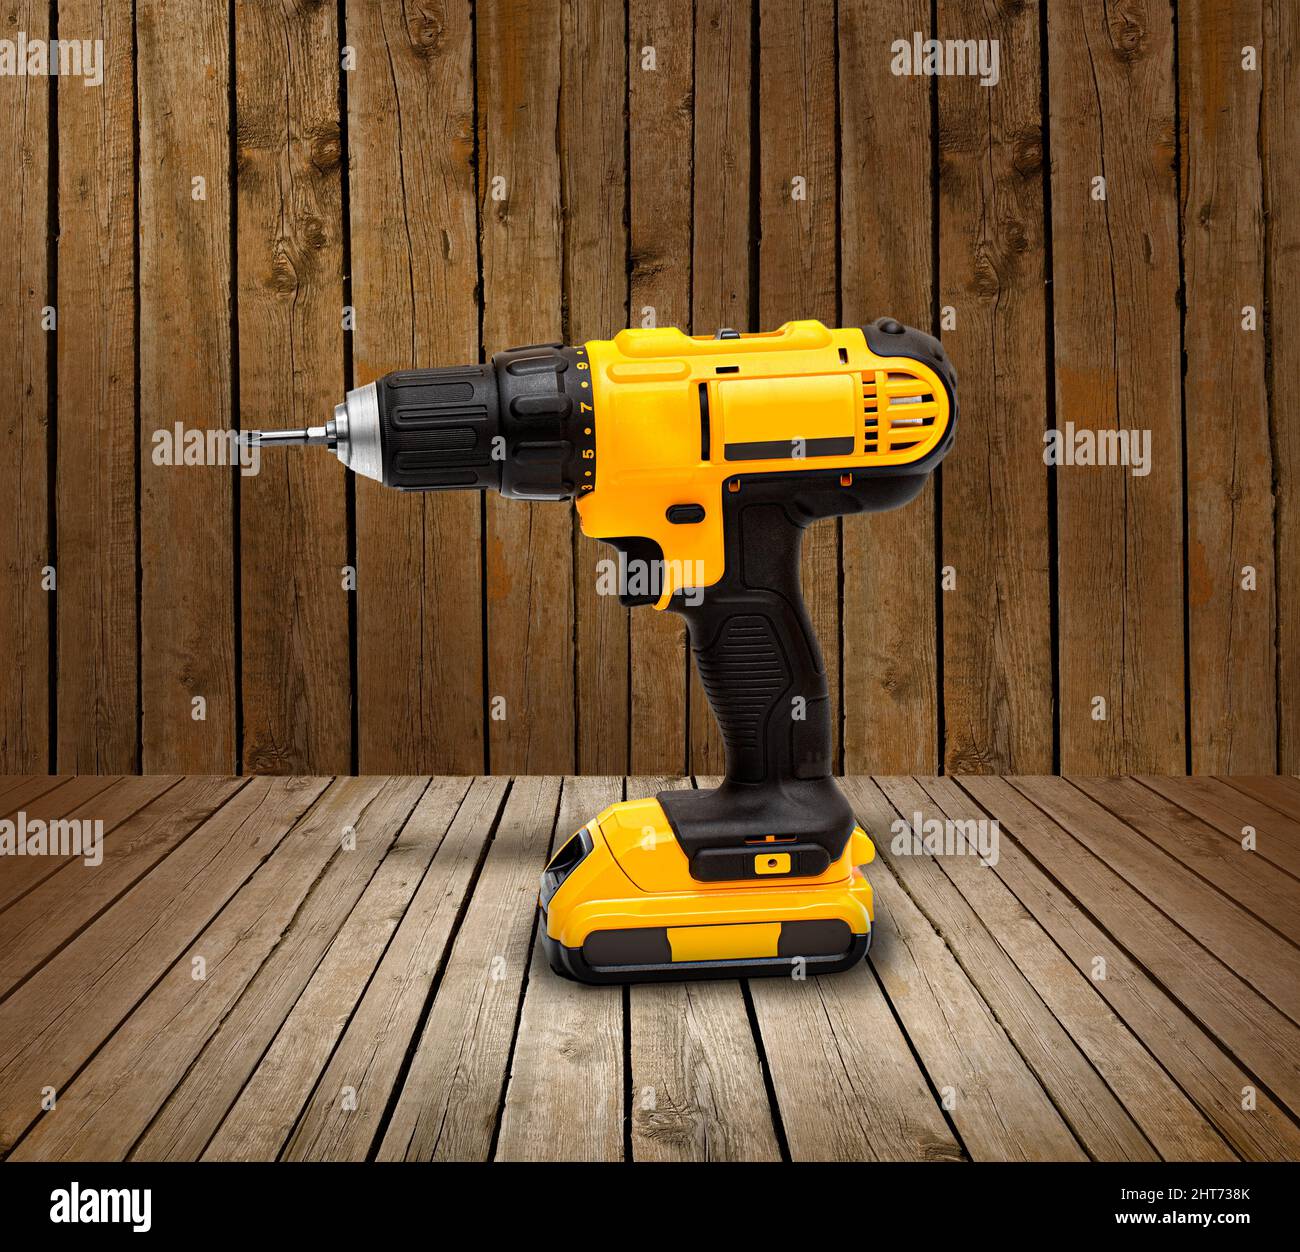 https://c8.alamy.com/comp/2HT738K/yellow-electric-cordless-screwdriver-drill-on-wooden-background-professional-home-repair-tool-2HT738K.jpg